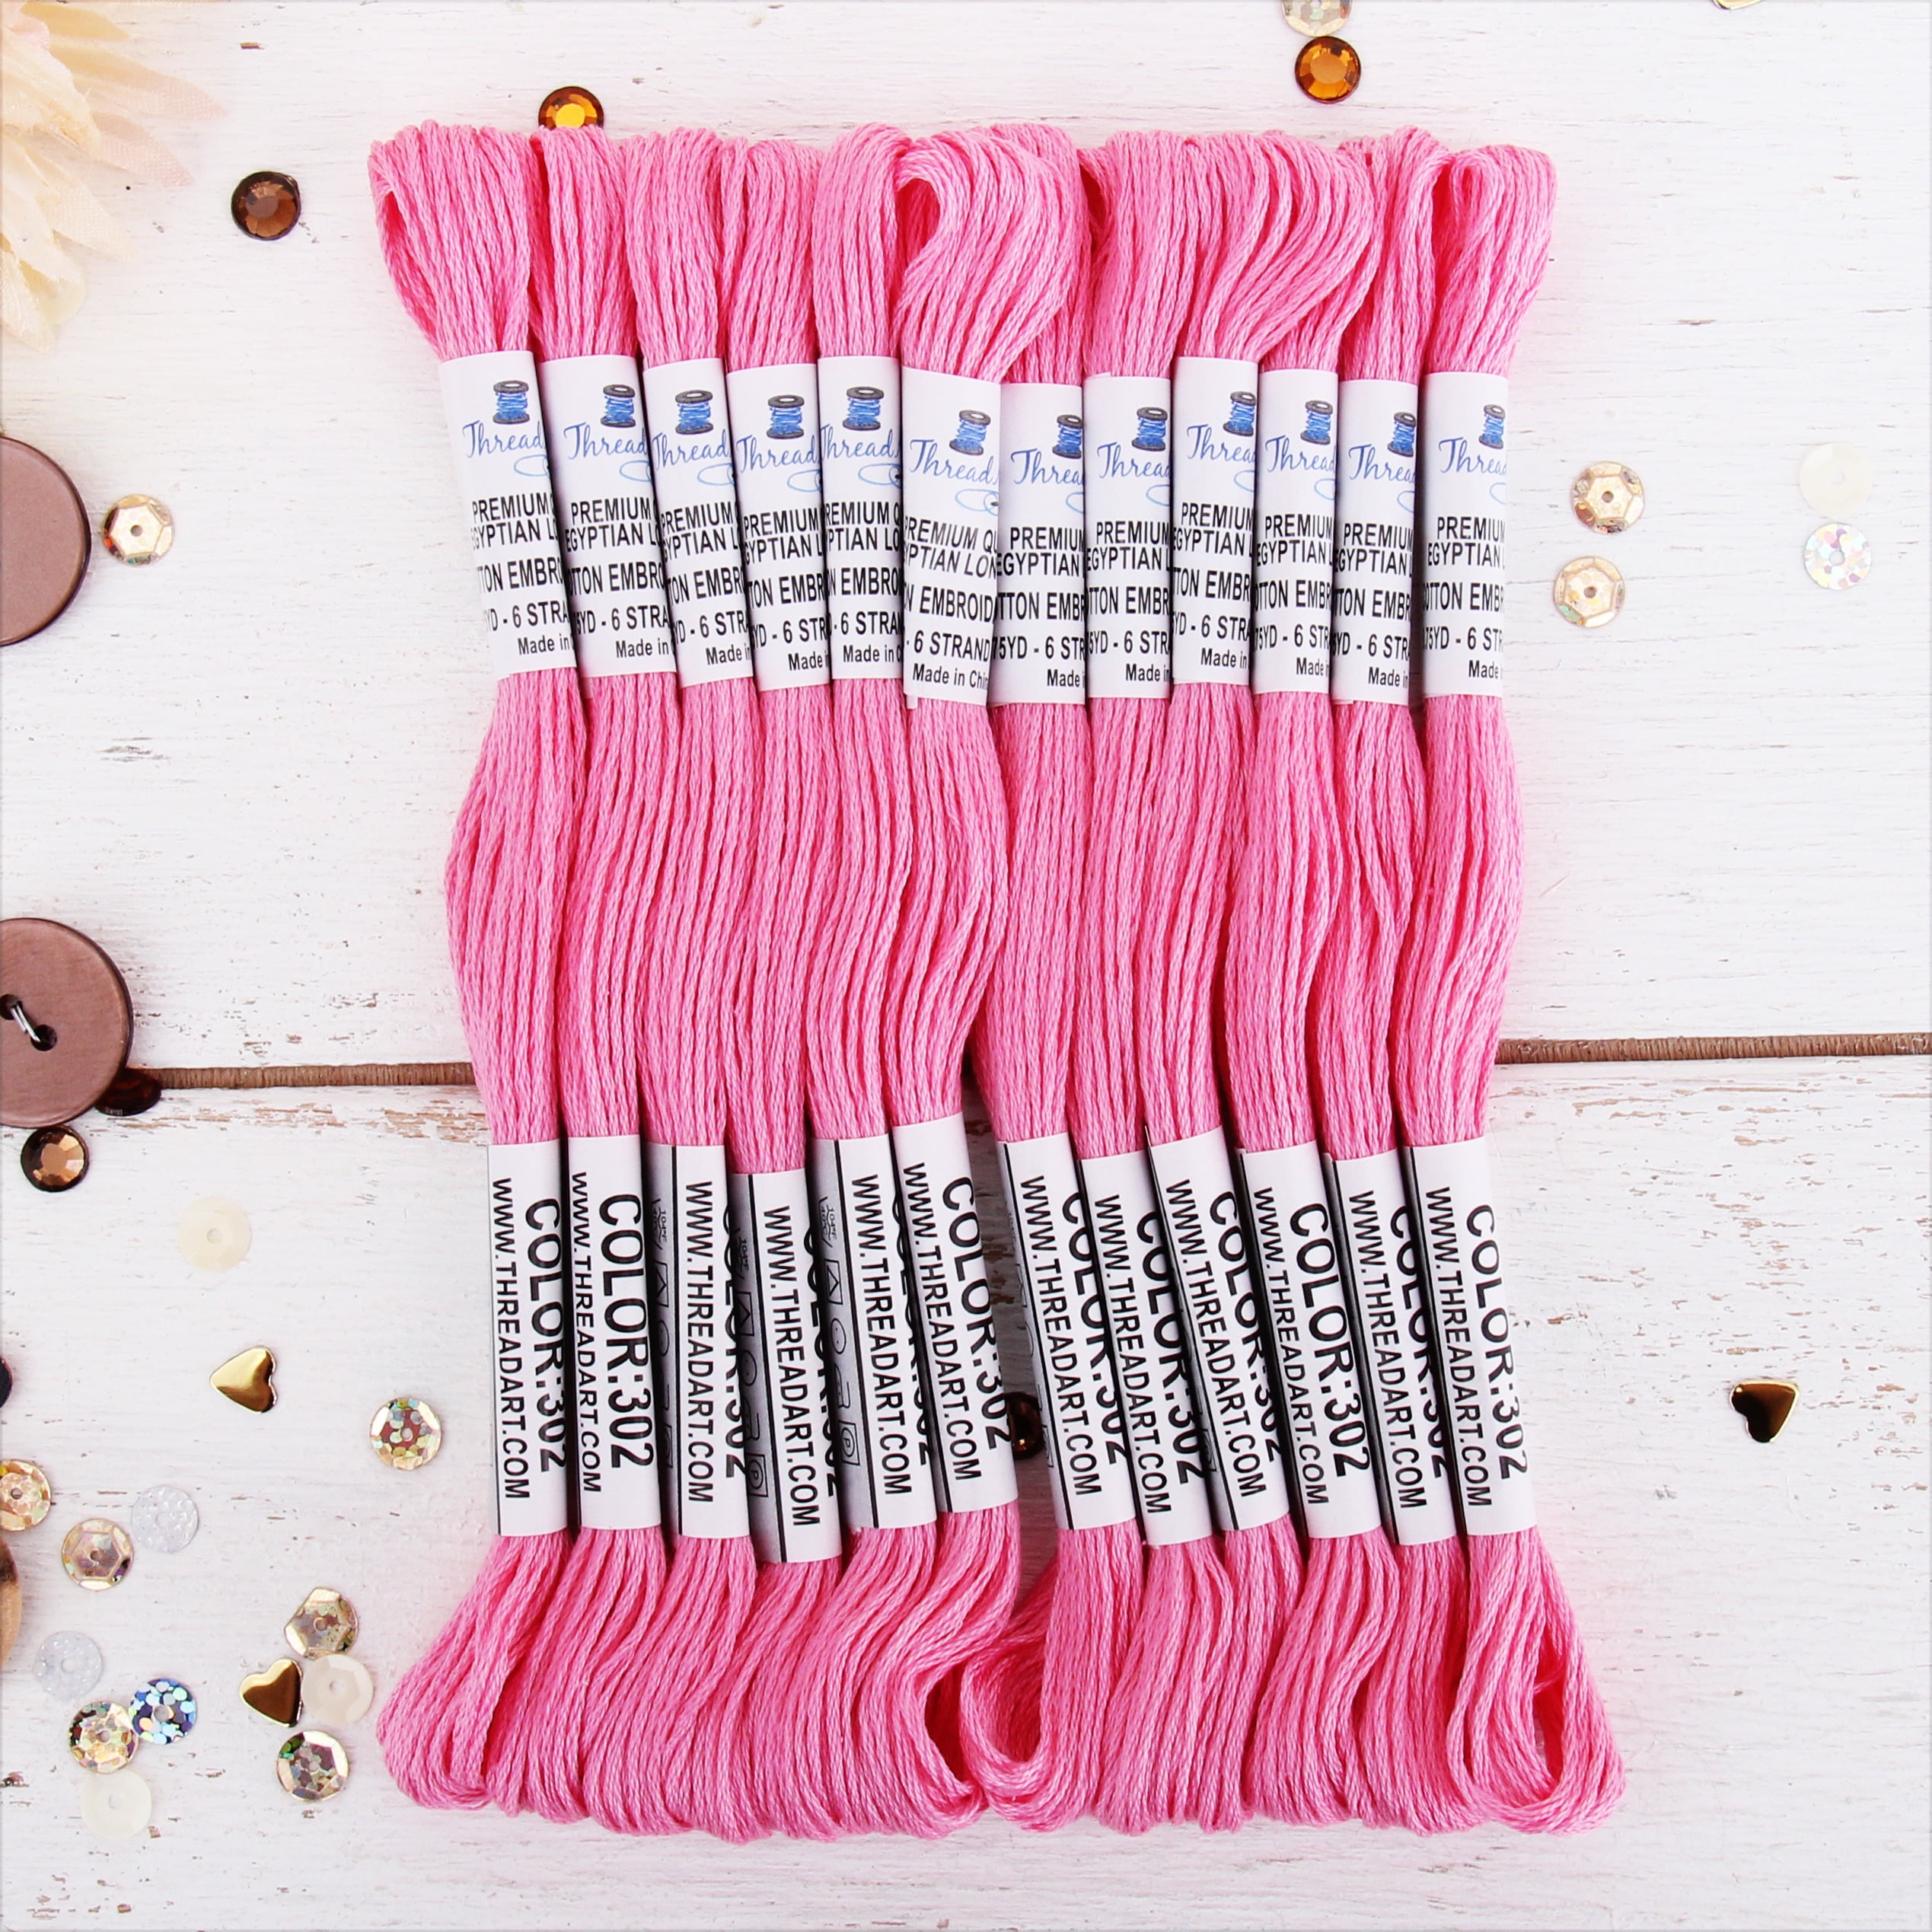 20 Pieces Black White Embroidery Threads Embroidery Stitching Floss Black Cross Stitch Threads Cotton Needlework Threads Craft hread Friendship Bracelets Threads for Knitting 